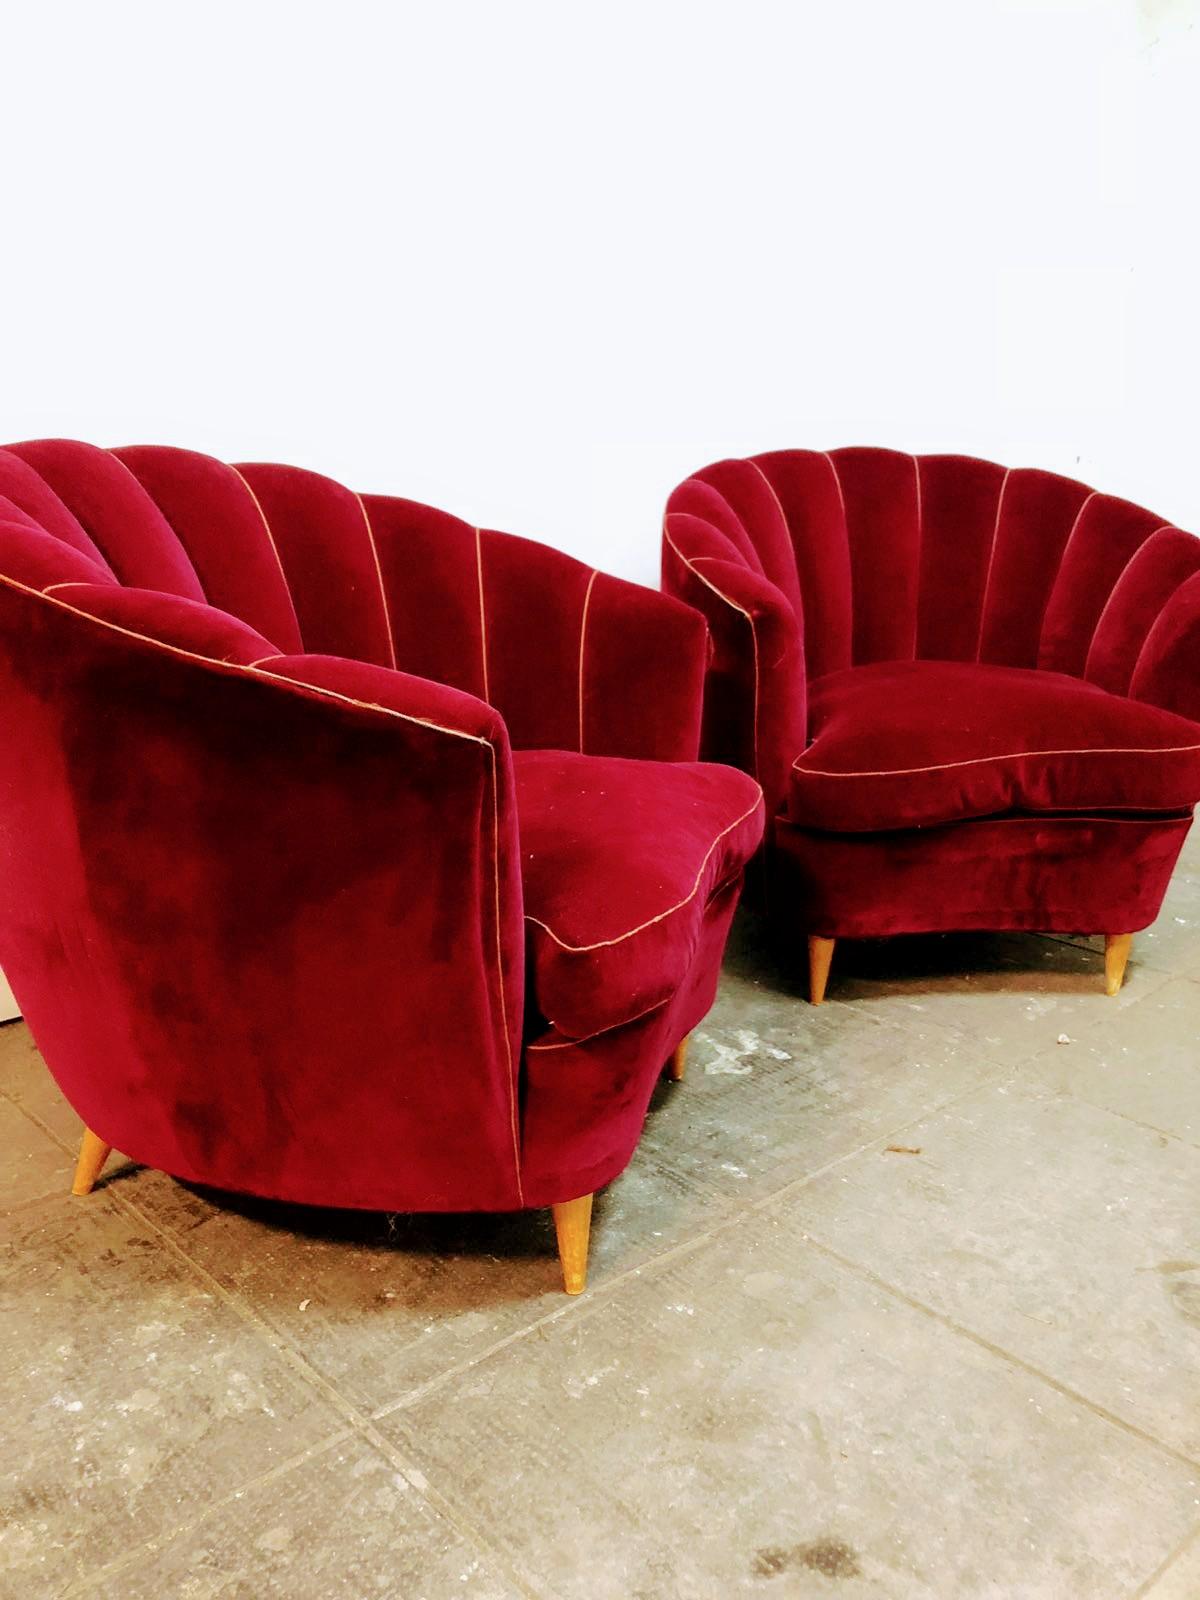 Ico Parisi pairs armchairs, Mid-Century Modern, Italian design, red velvet original and wooden feet. The soft and enveloping shape reminds the shell.